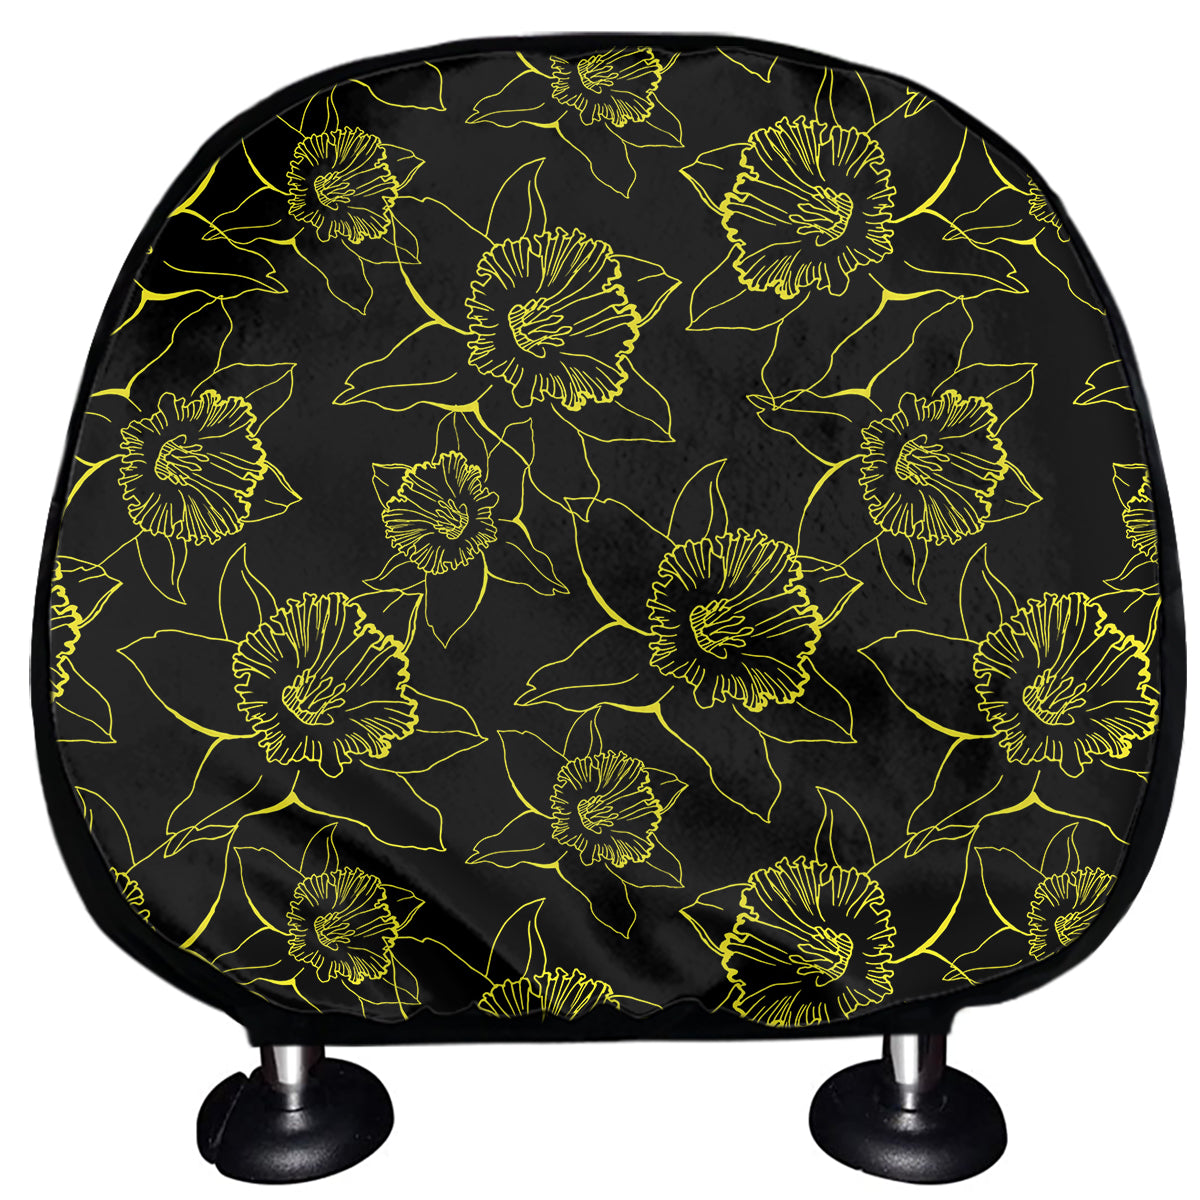 Black And Yellow Daffodil Pattern Print Car Headrest Covers